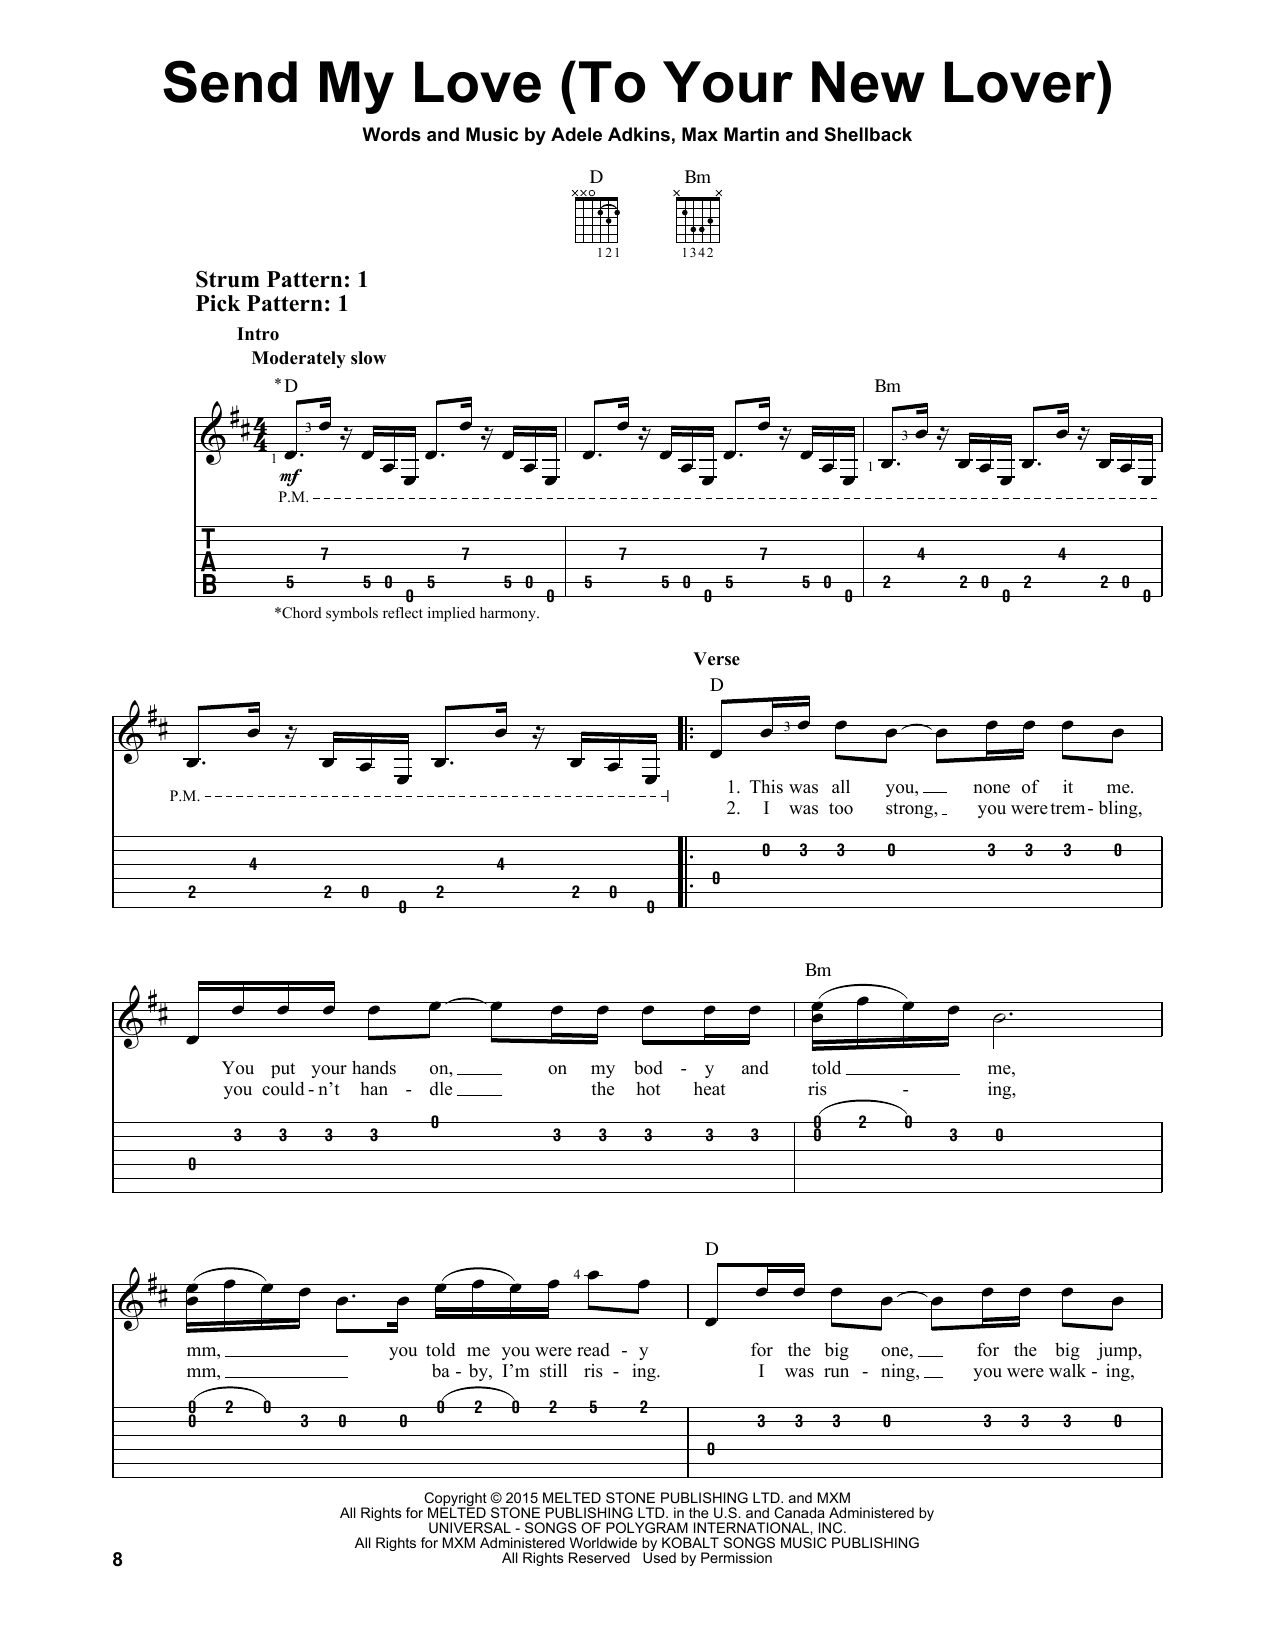 Send My Love (To Your New Lover) sheet music